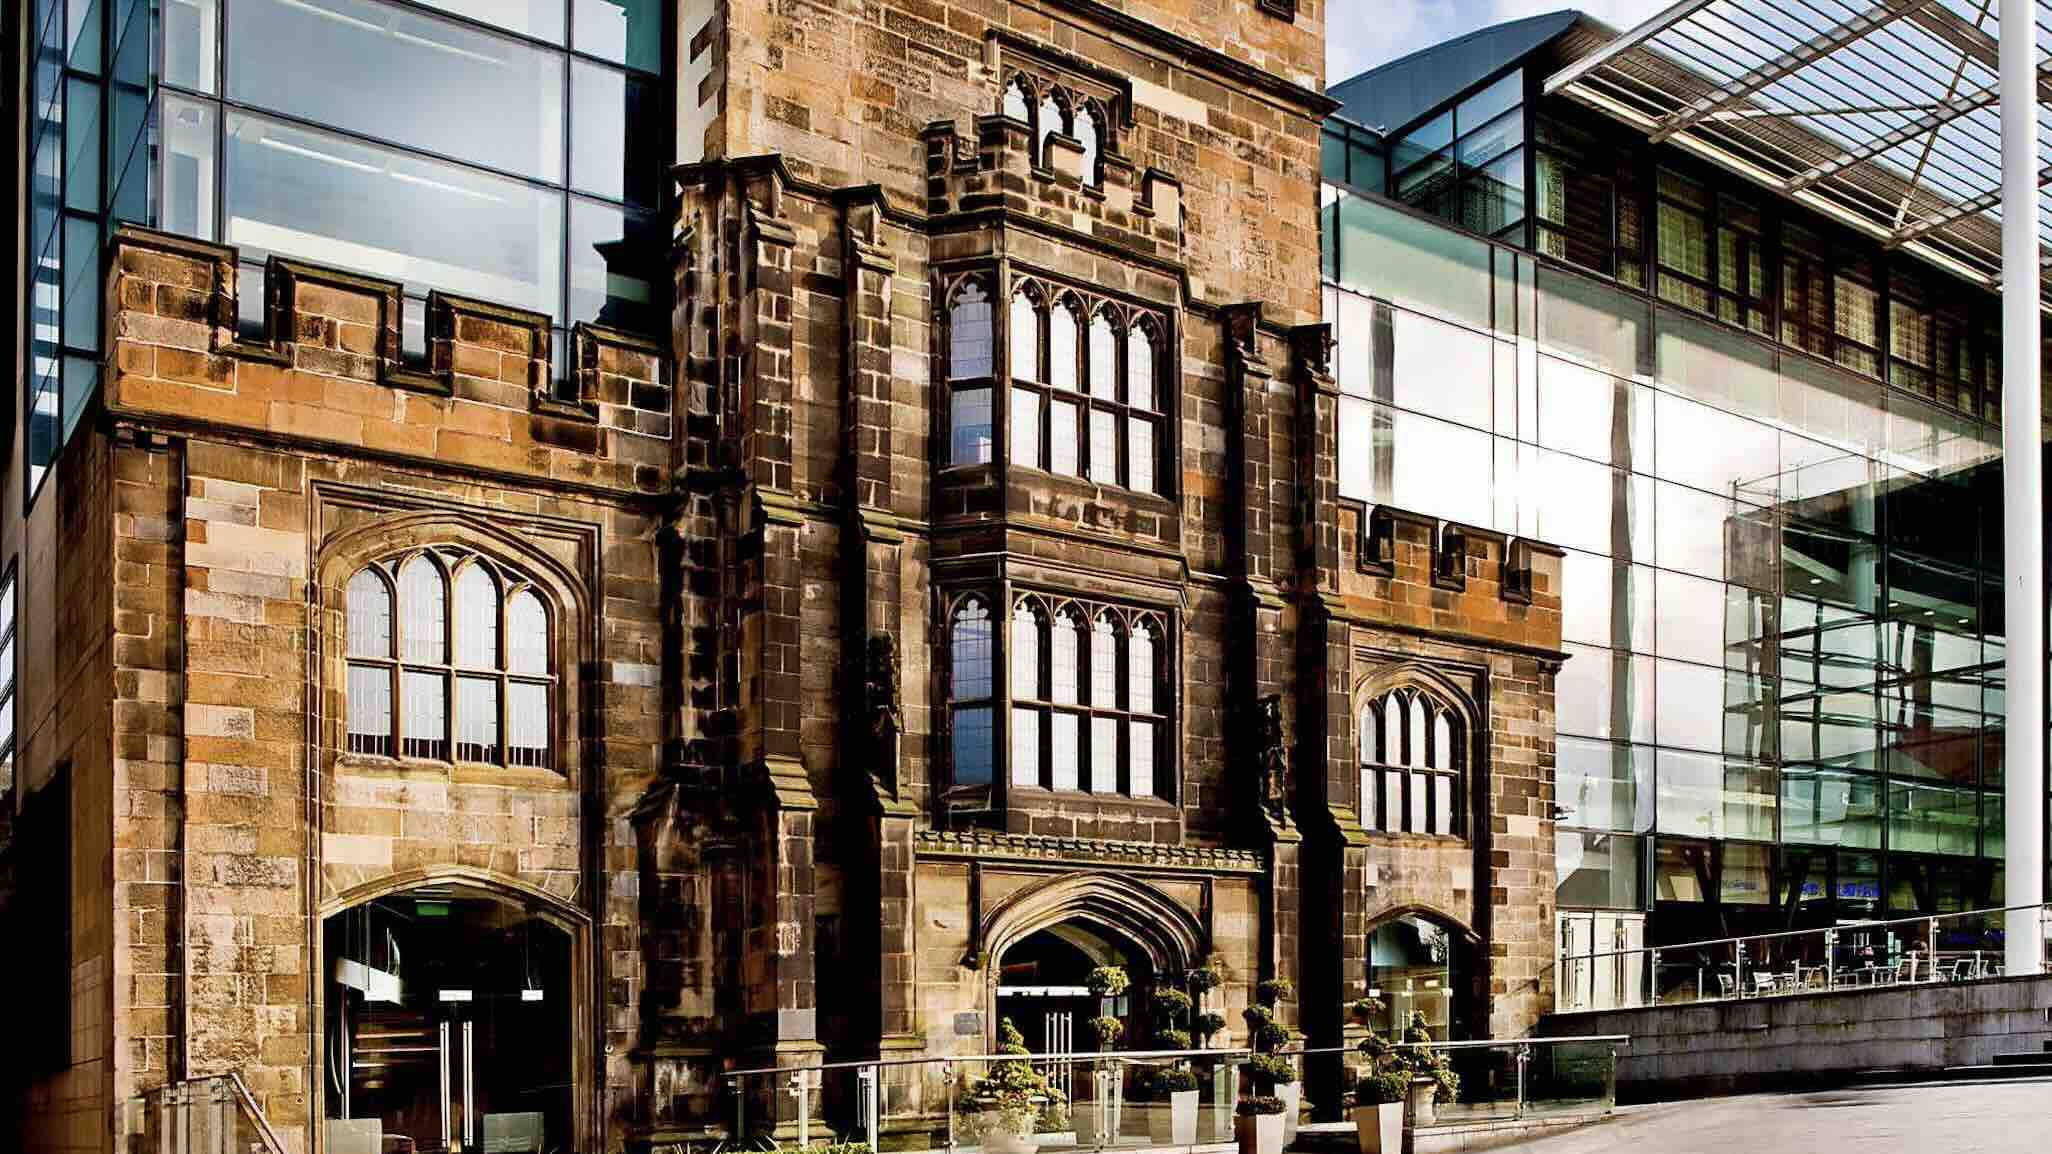 The Glasshouse is a leading Luxury edinburgh hotel set in an historic building exterior shown here copy